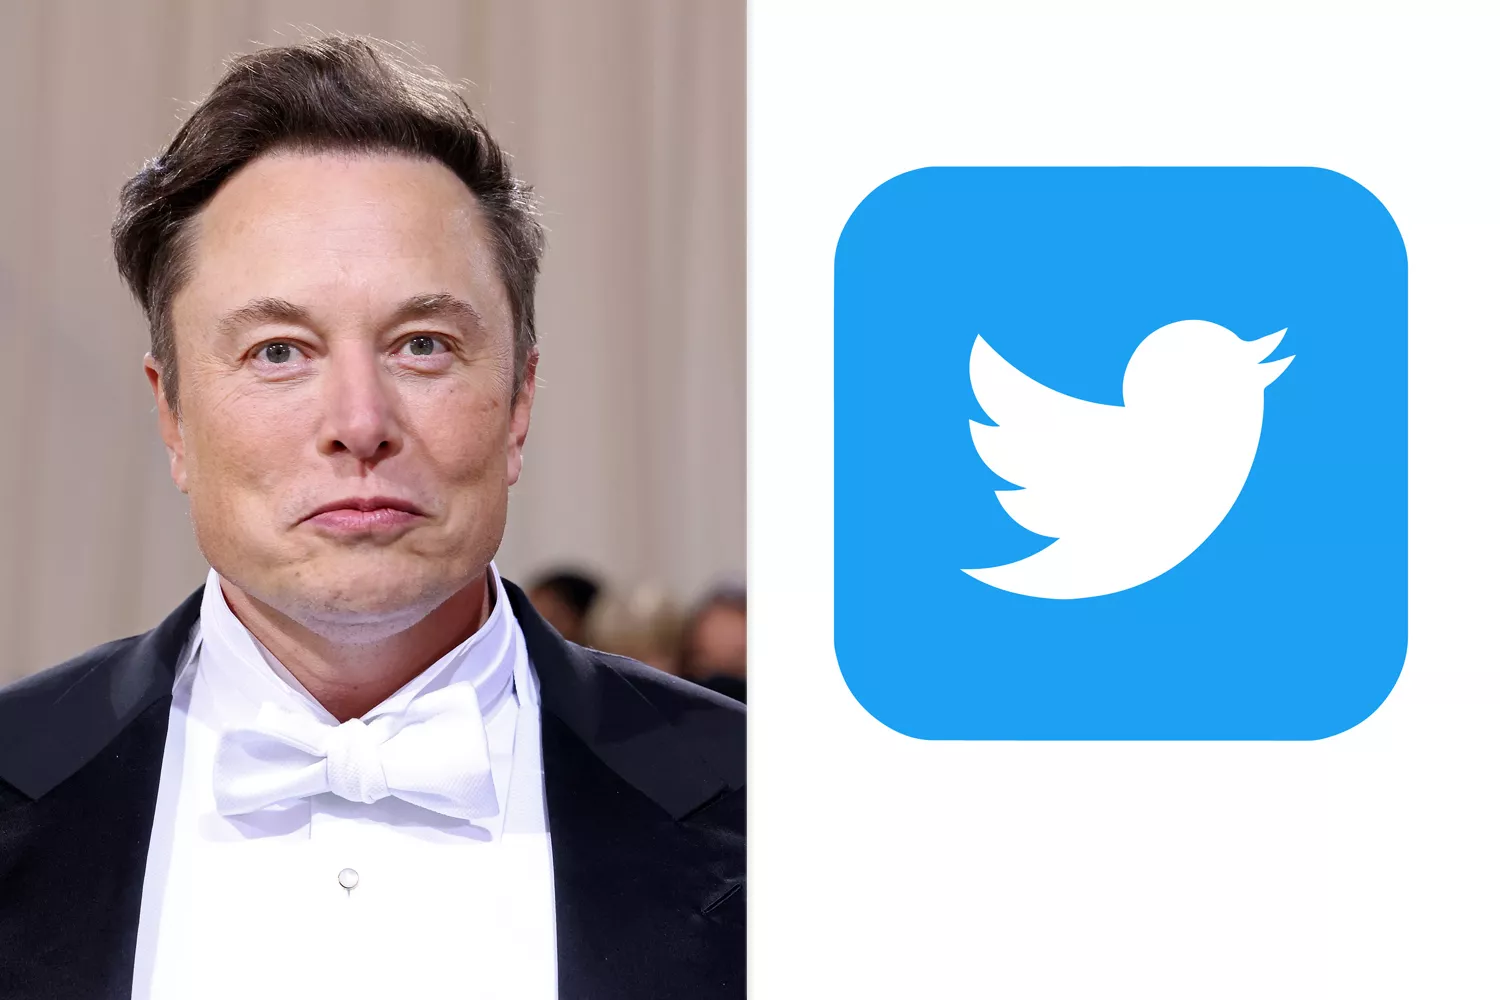 Musk urges Twitter users to get verified and earn thousands of dollars